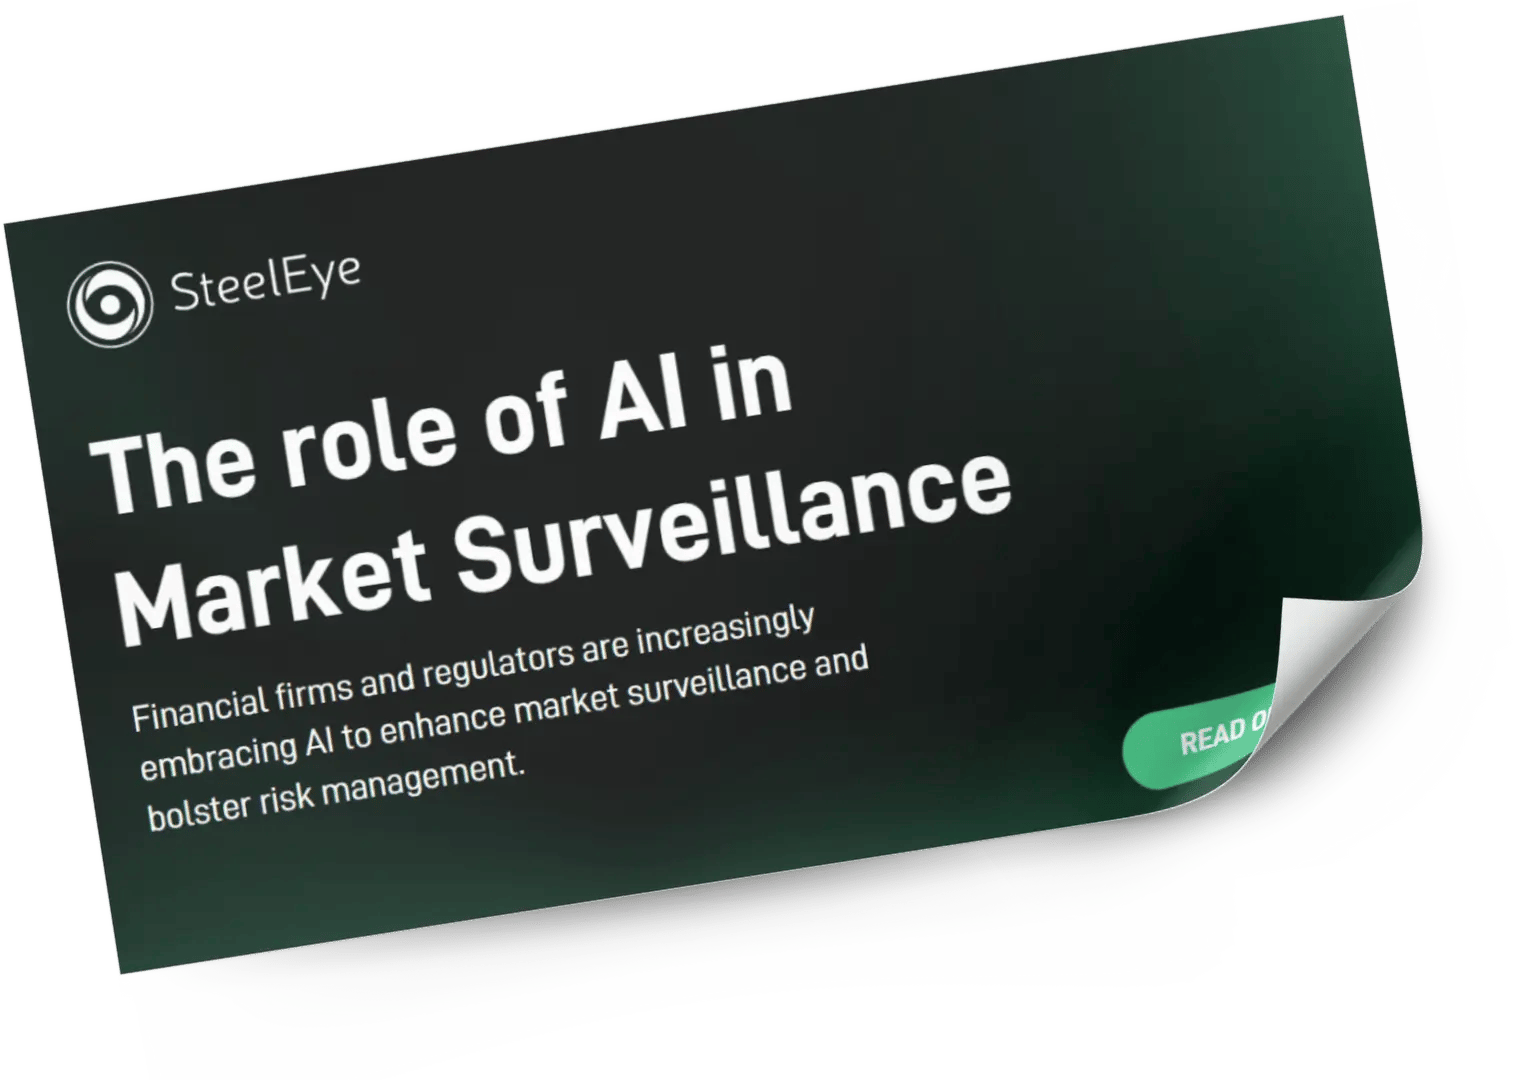 SteelEye-The-Role-of-AI-in-Market-Surveillance